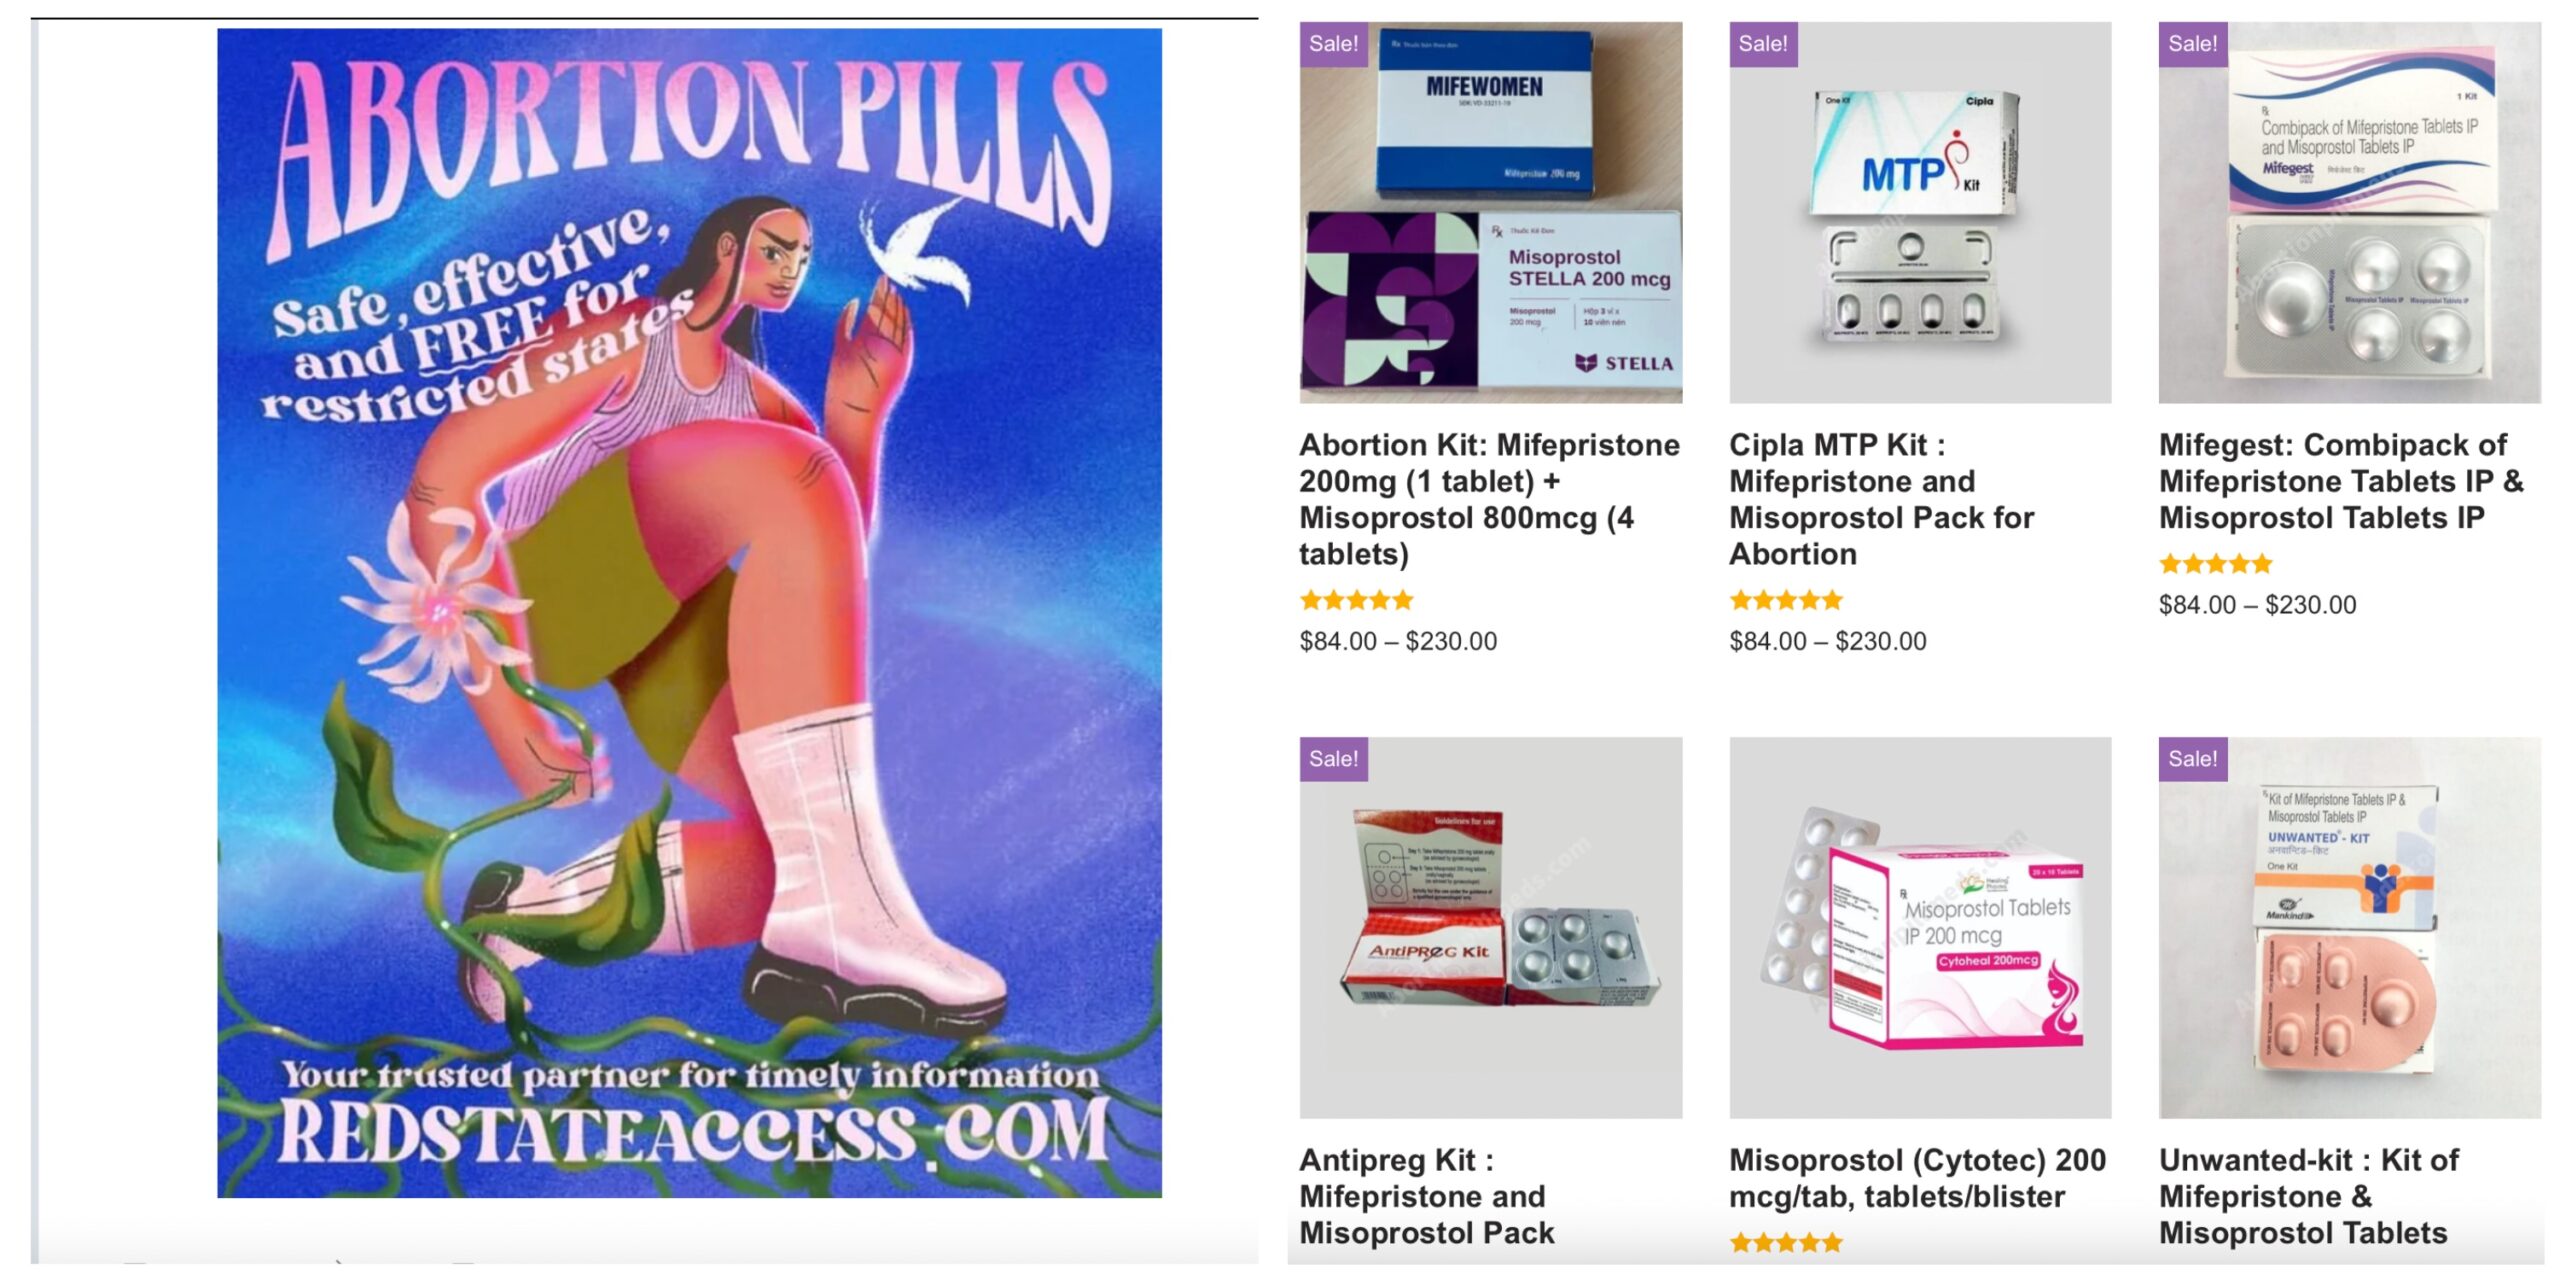 How A Leftist Network Of Websites Floods Red States With Abortion Pills With No Consequences